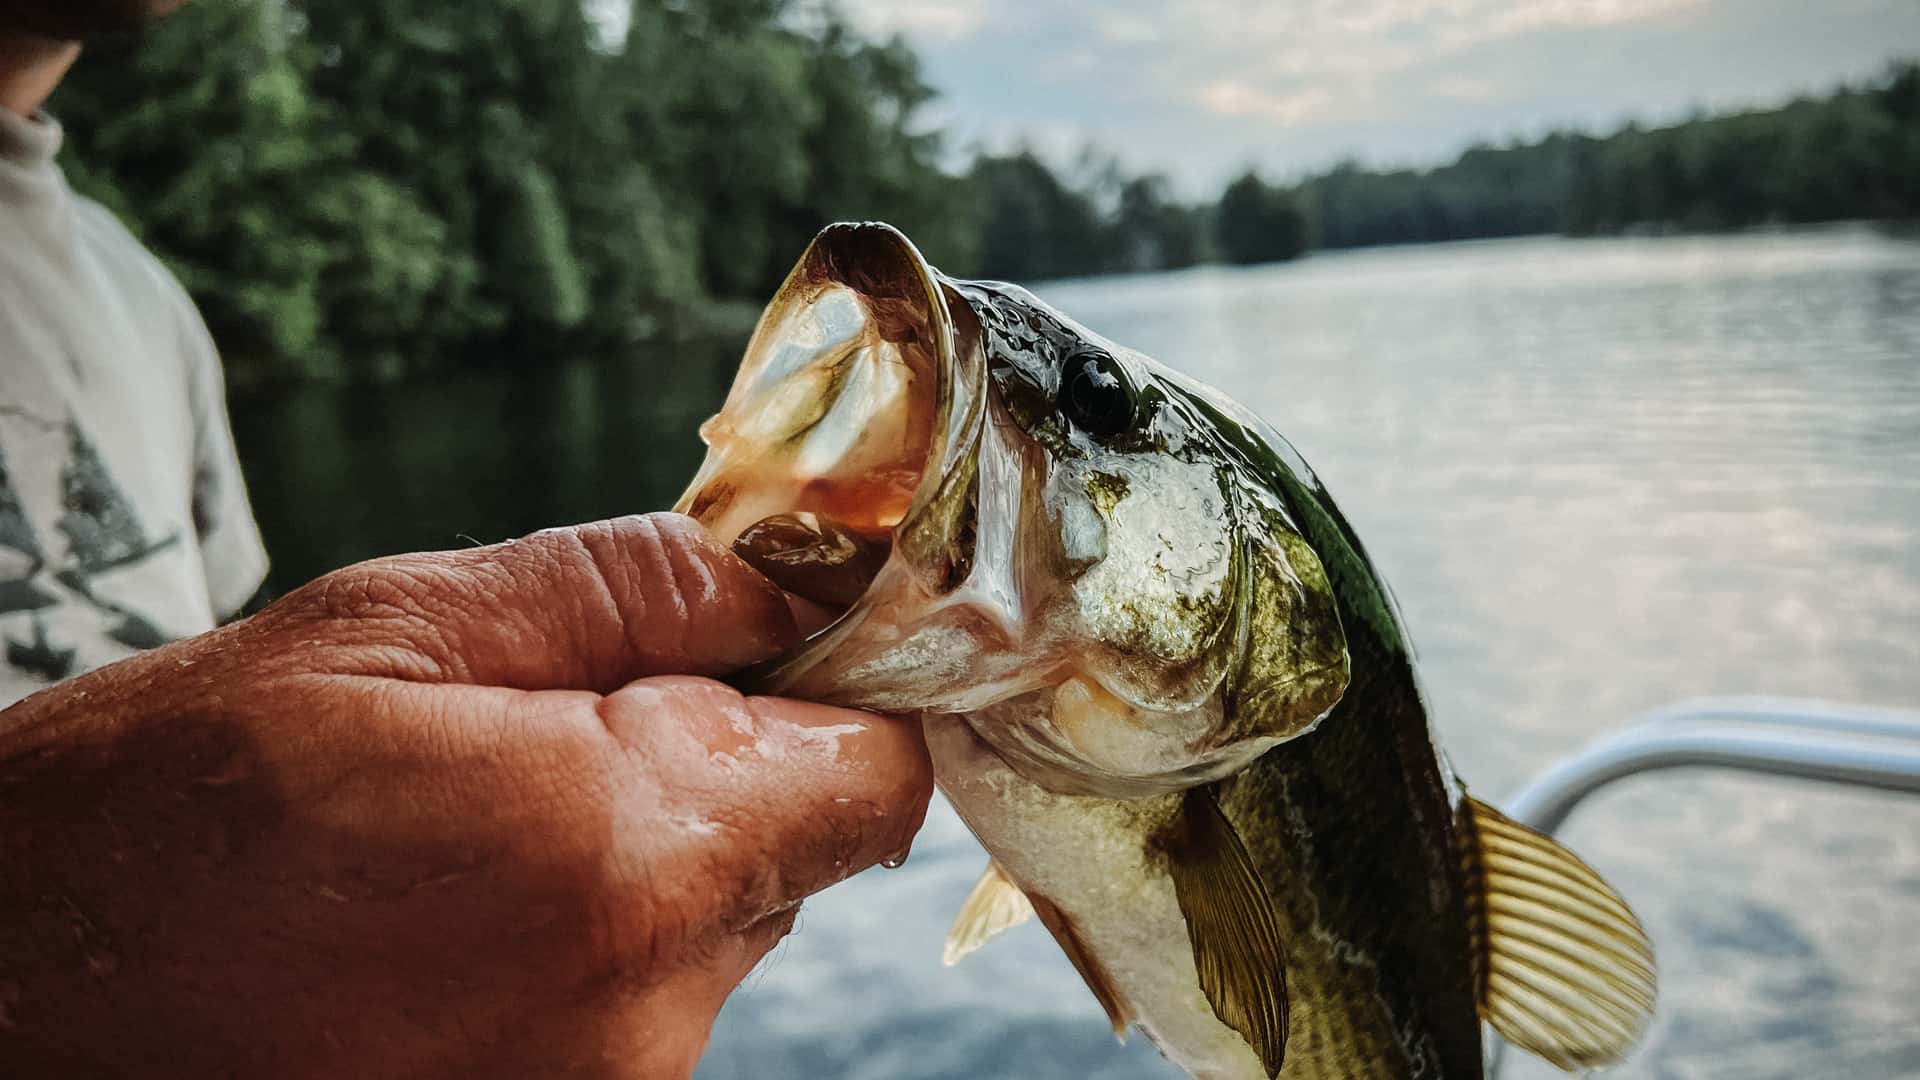 Largemouth Bass Fishing in Ontario: A Beginner's Guide to Catching